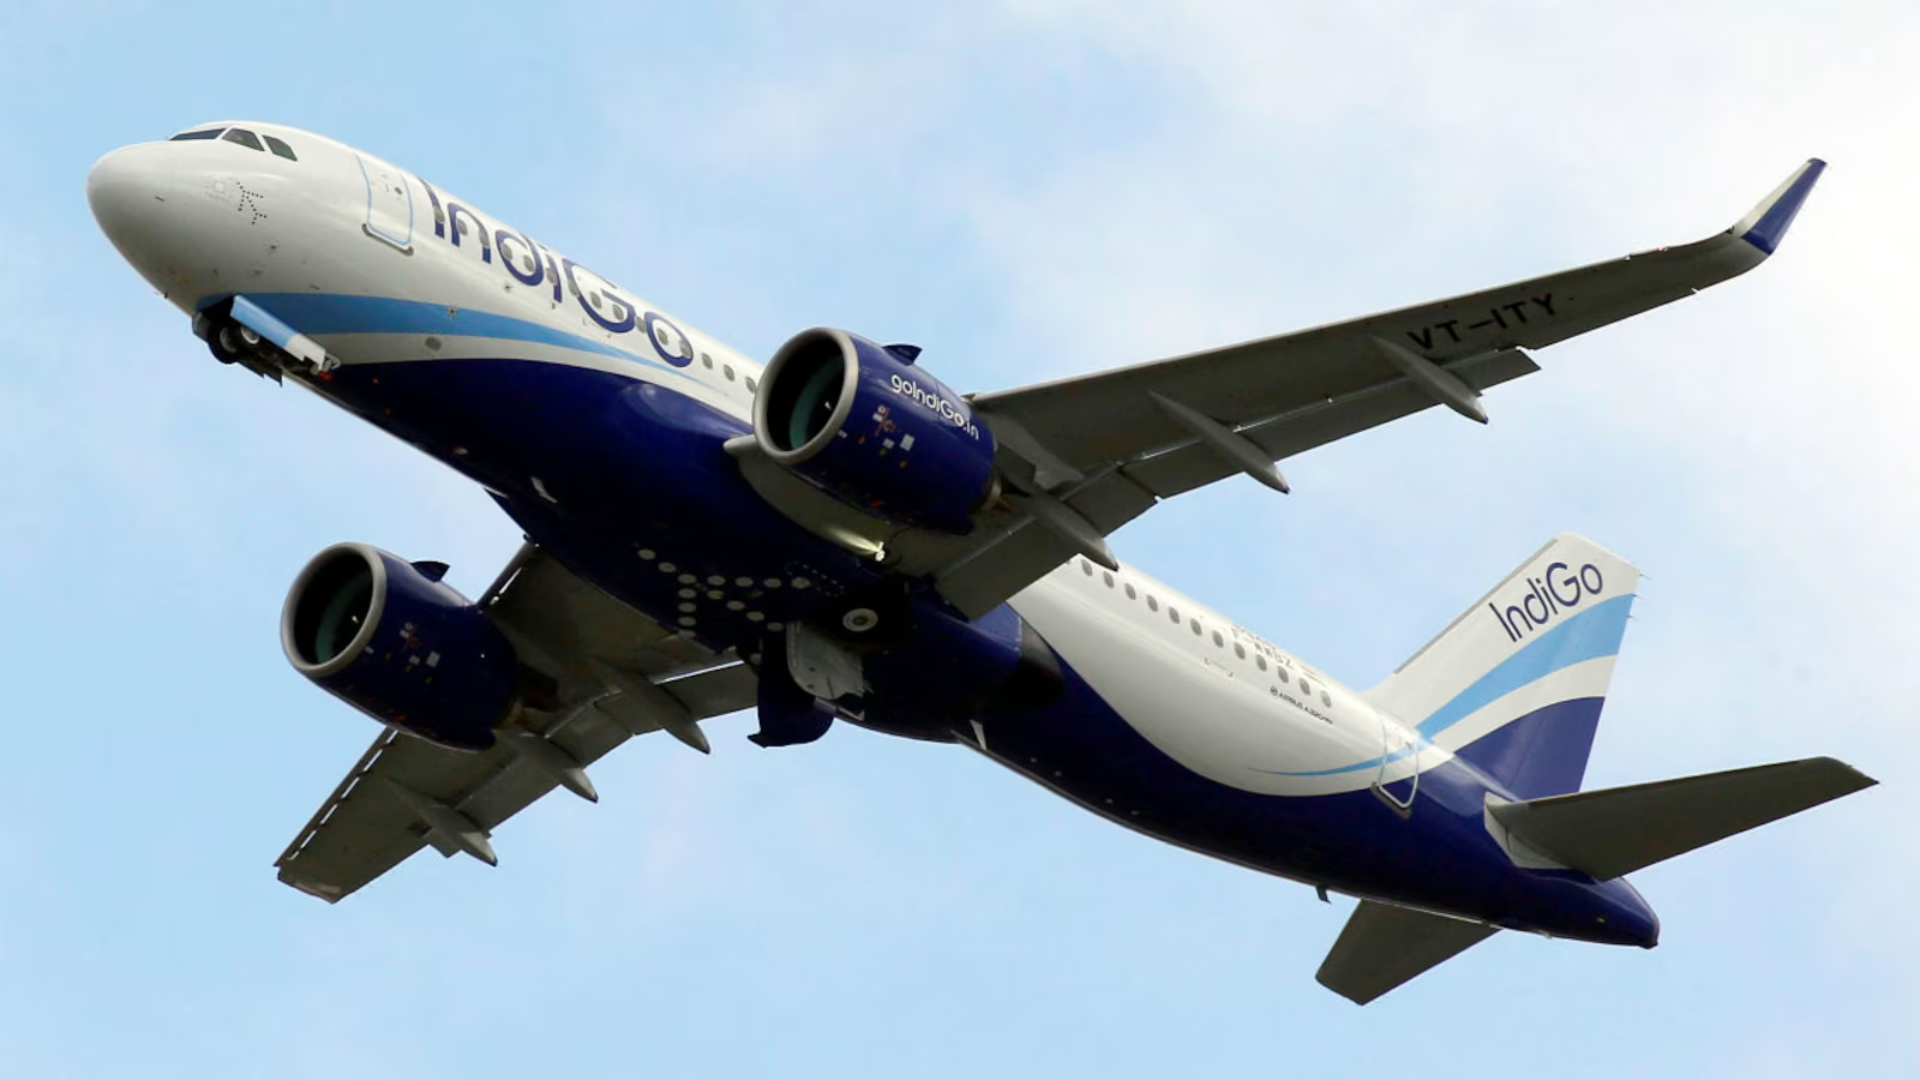 Extra Passenger Found Standing In Plane; Taxiing IndiGo Flight Returns To Drop Them Off